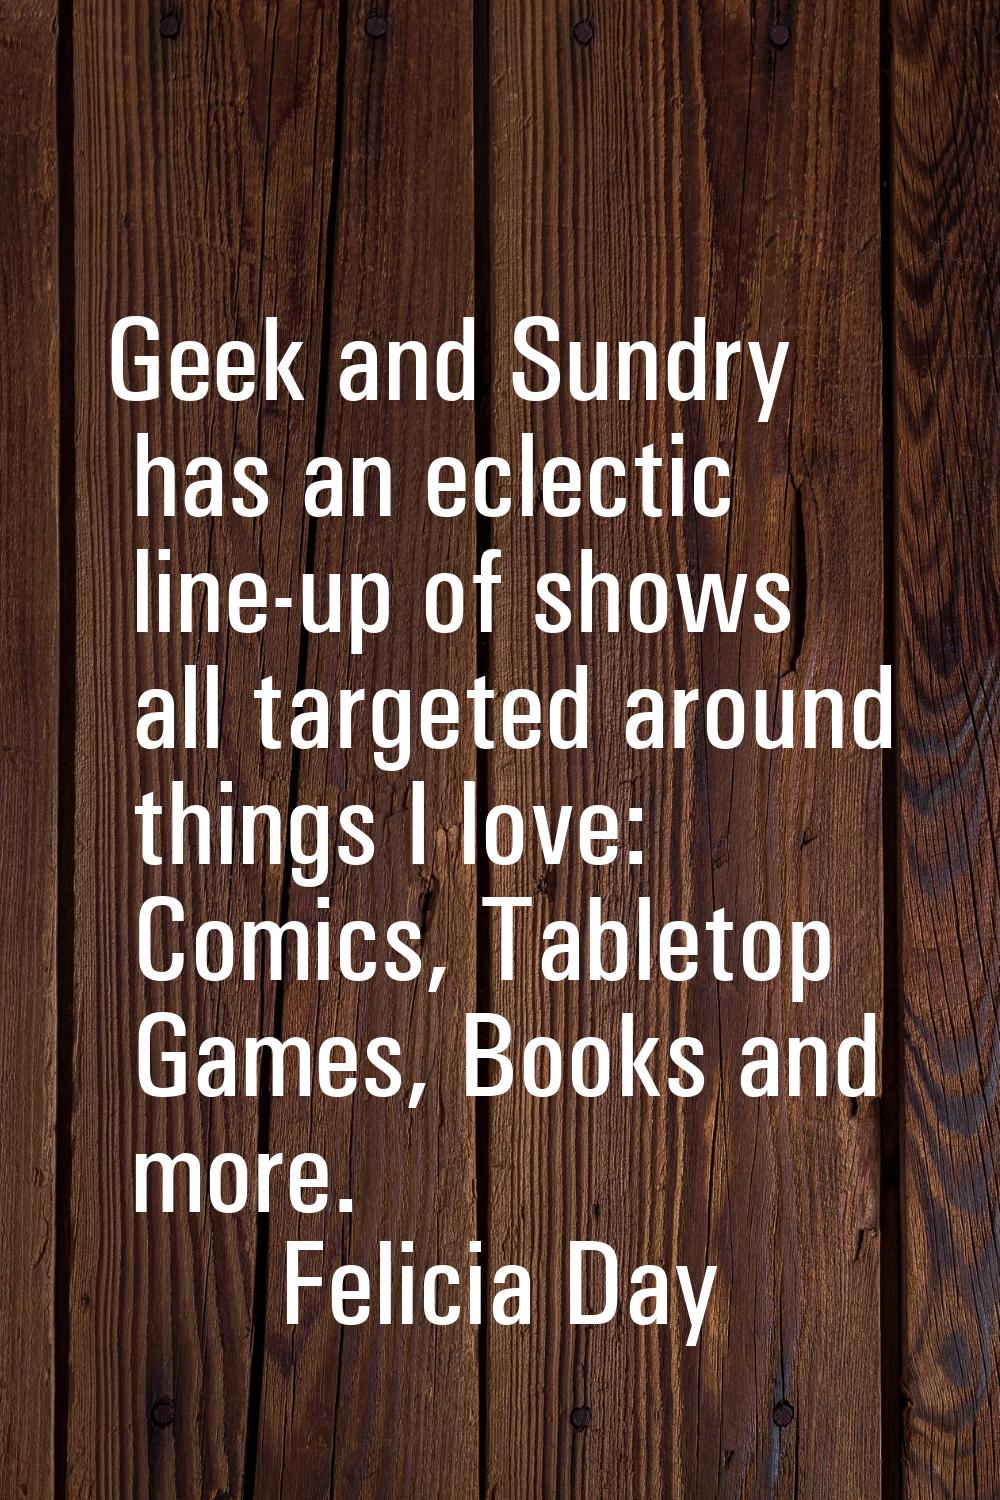 Geek and Sundry has an eclectic line-up of shows all targeted around things I love: Comics, Tableto